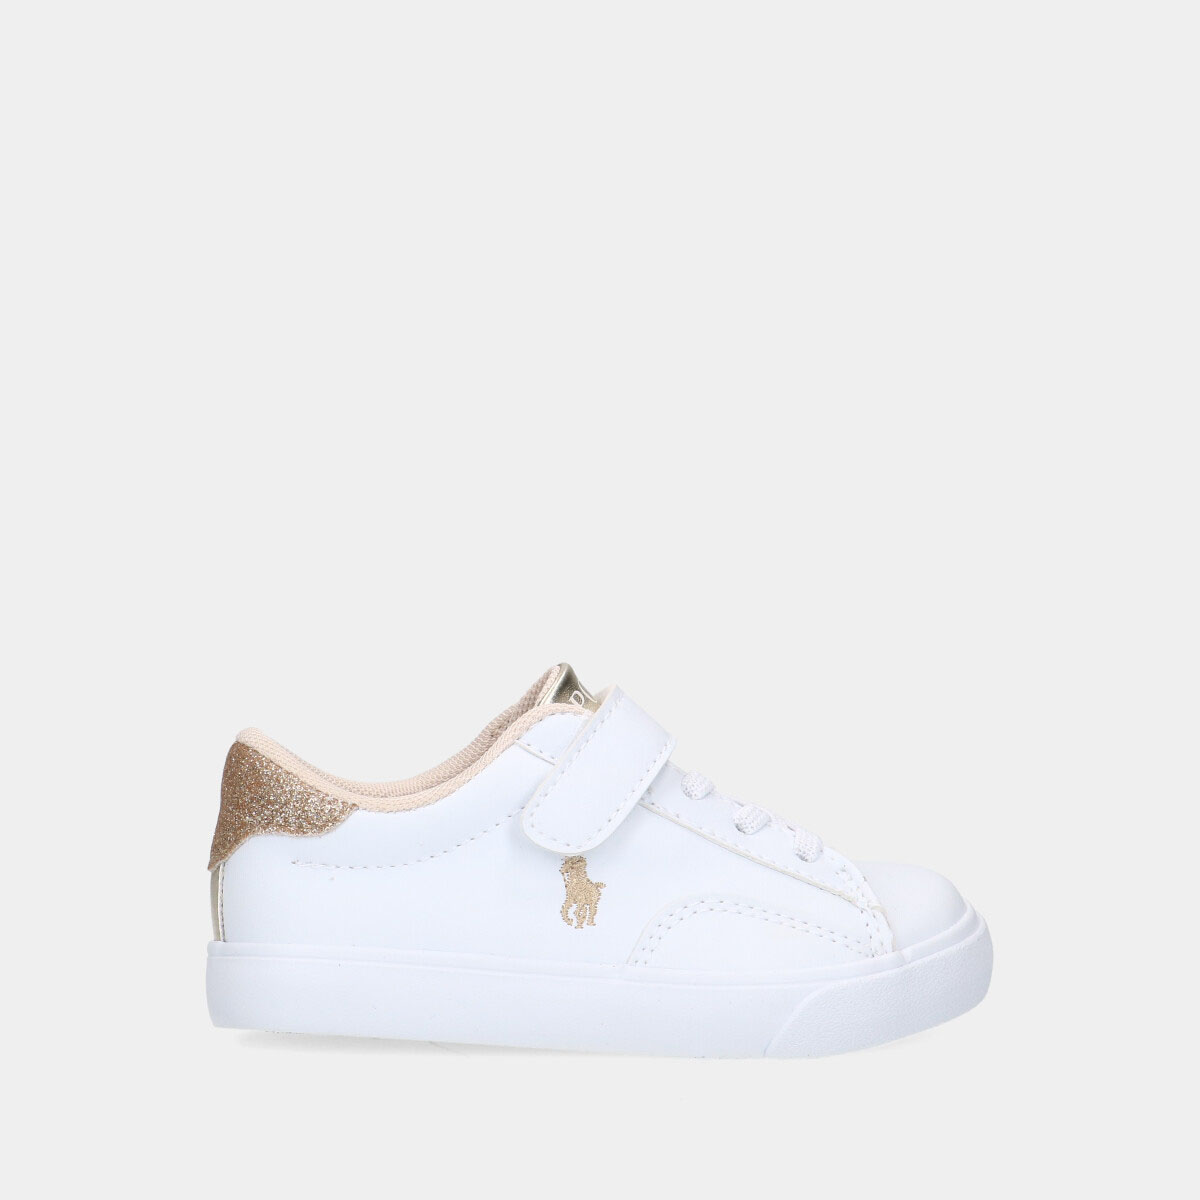 Polo Ralph Lauren Theron V PS White / Gold peuter sneakers 